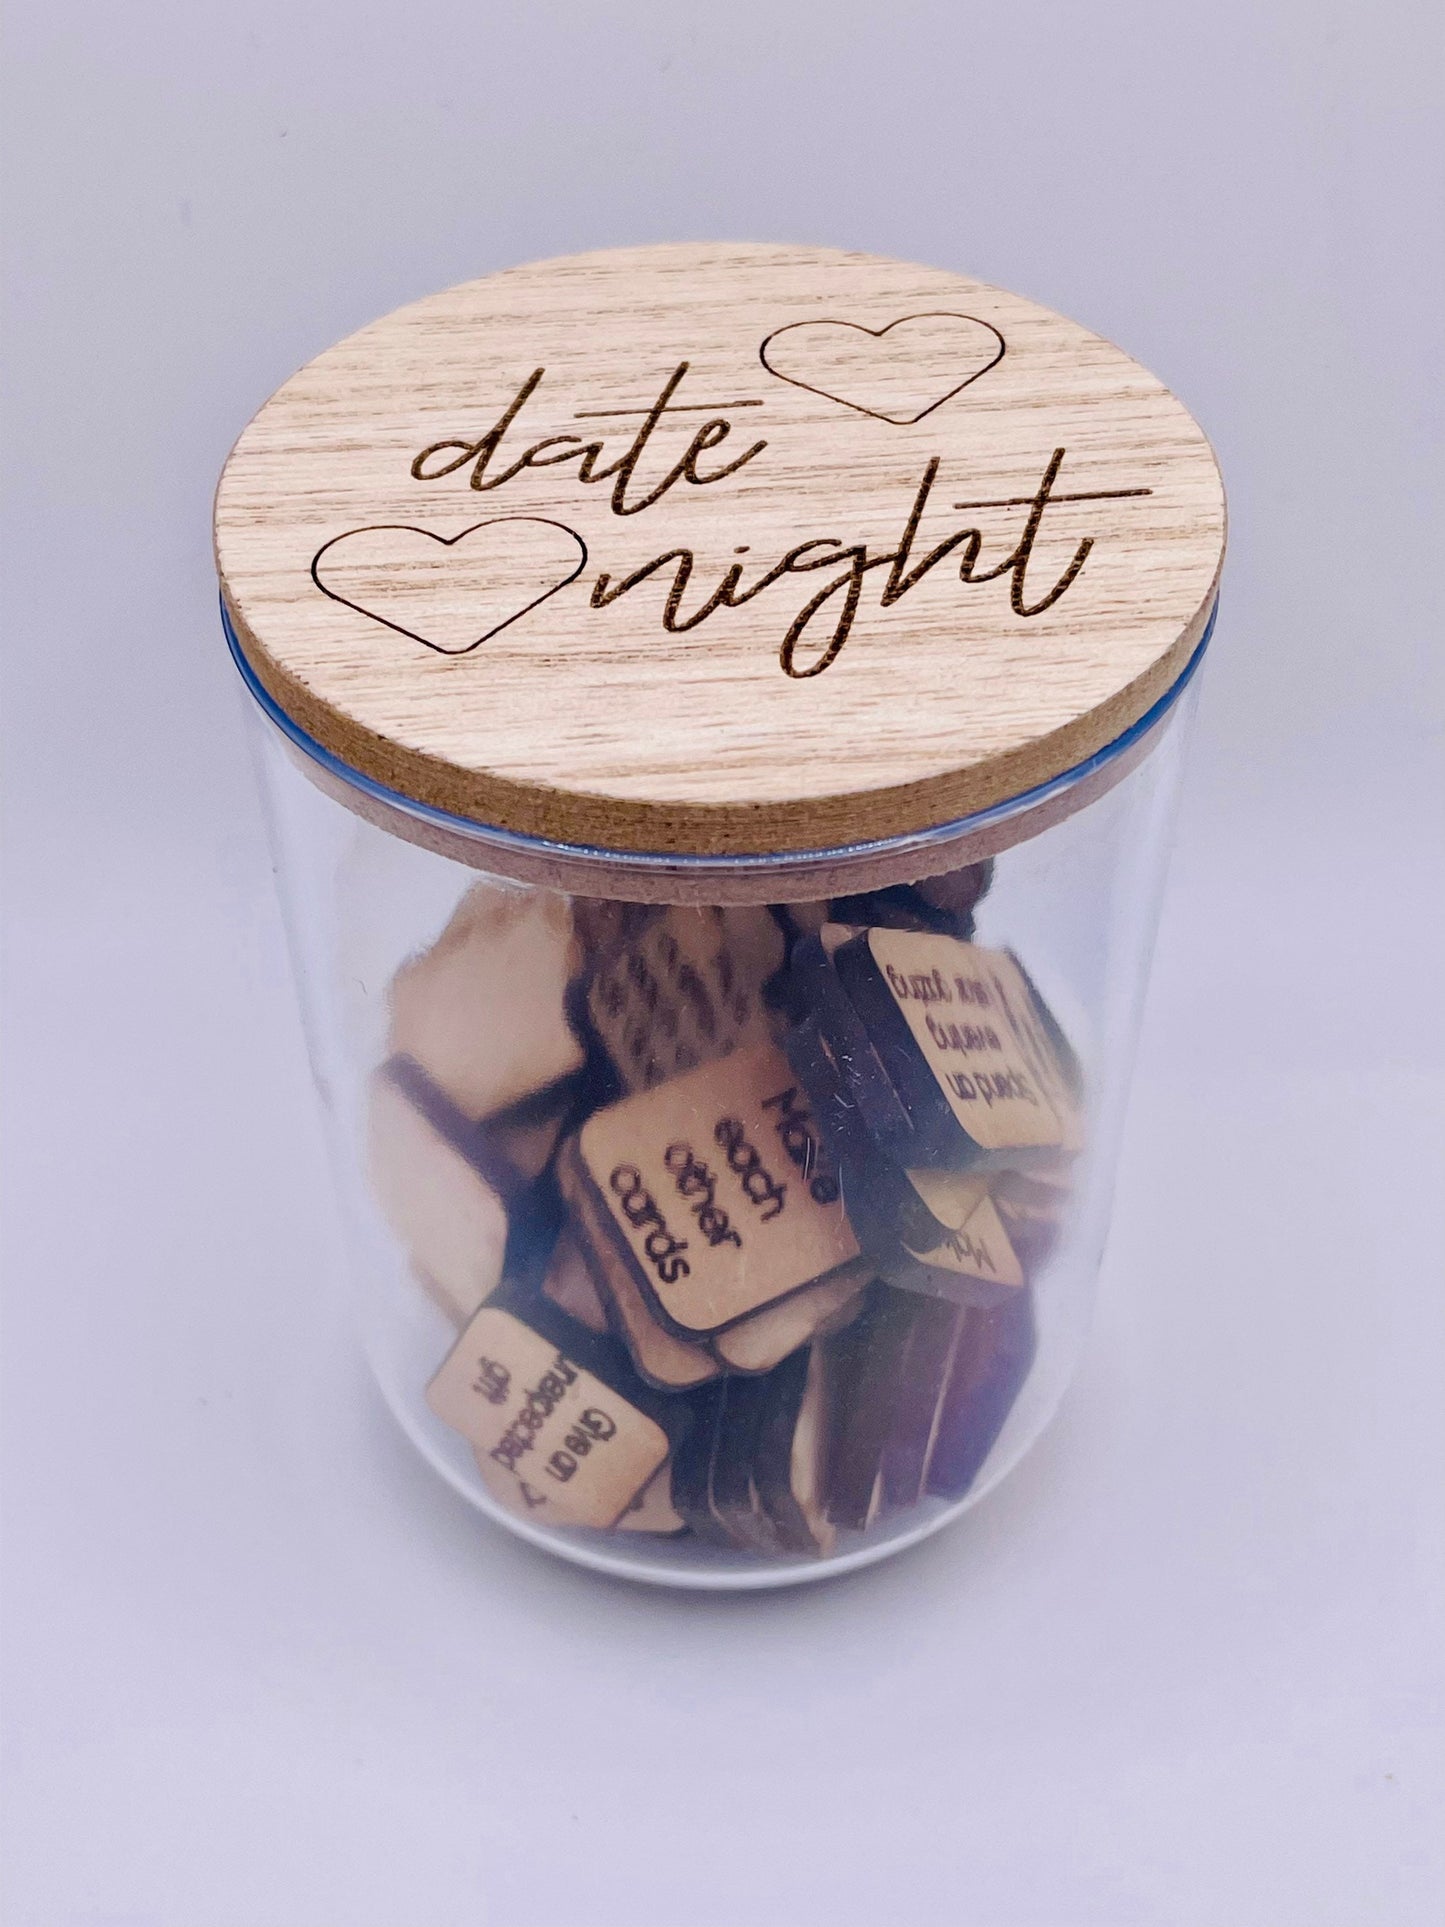 Date Night Tokens, date night, gifts for couples, couples gift, anniversary, date ideas, valentines day